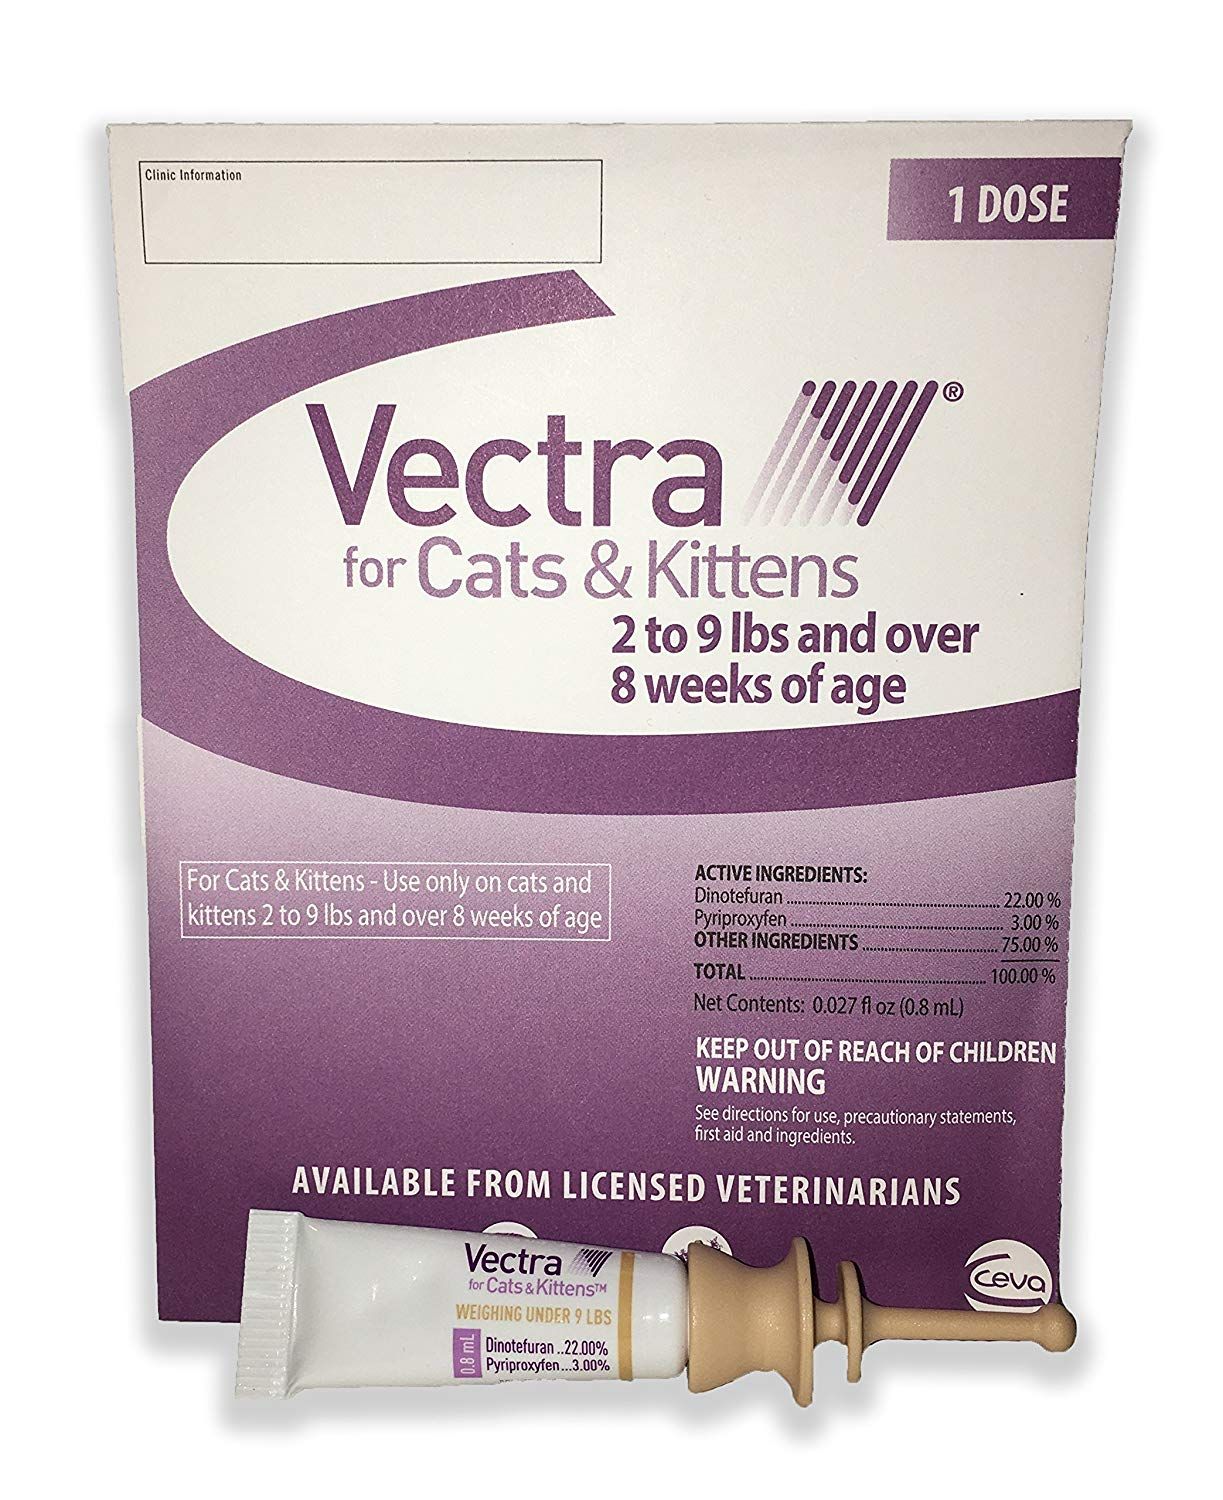 Vectra for Cats and Kittens Under 9 Lbs Tan Single (1) Dose USA Version ...